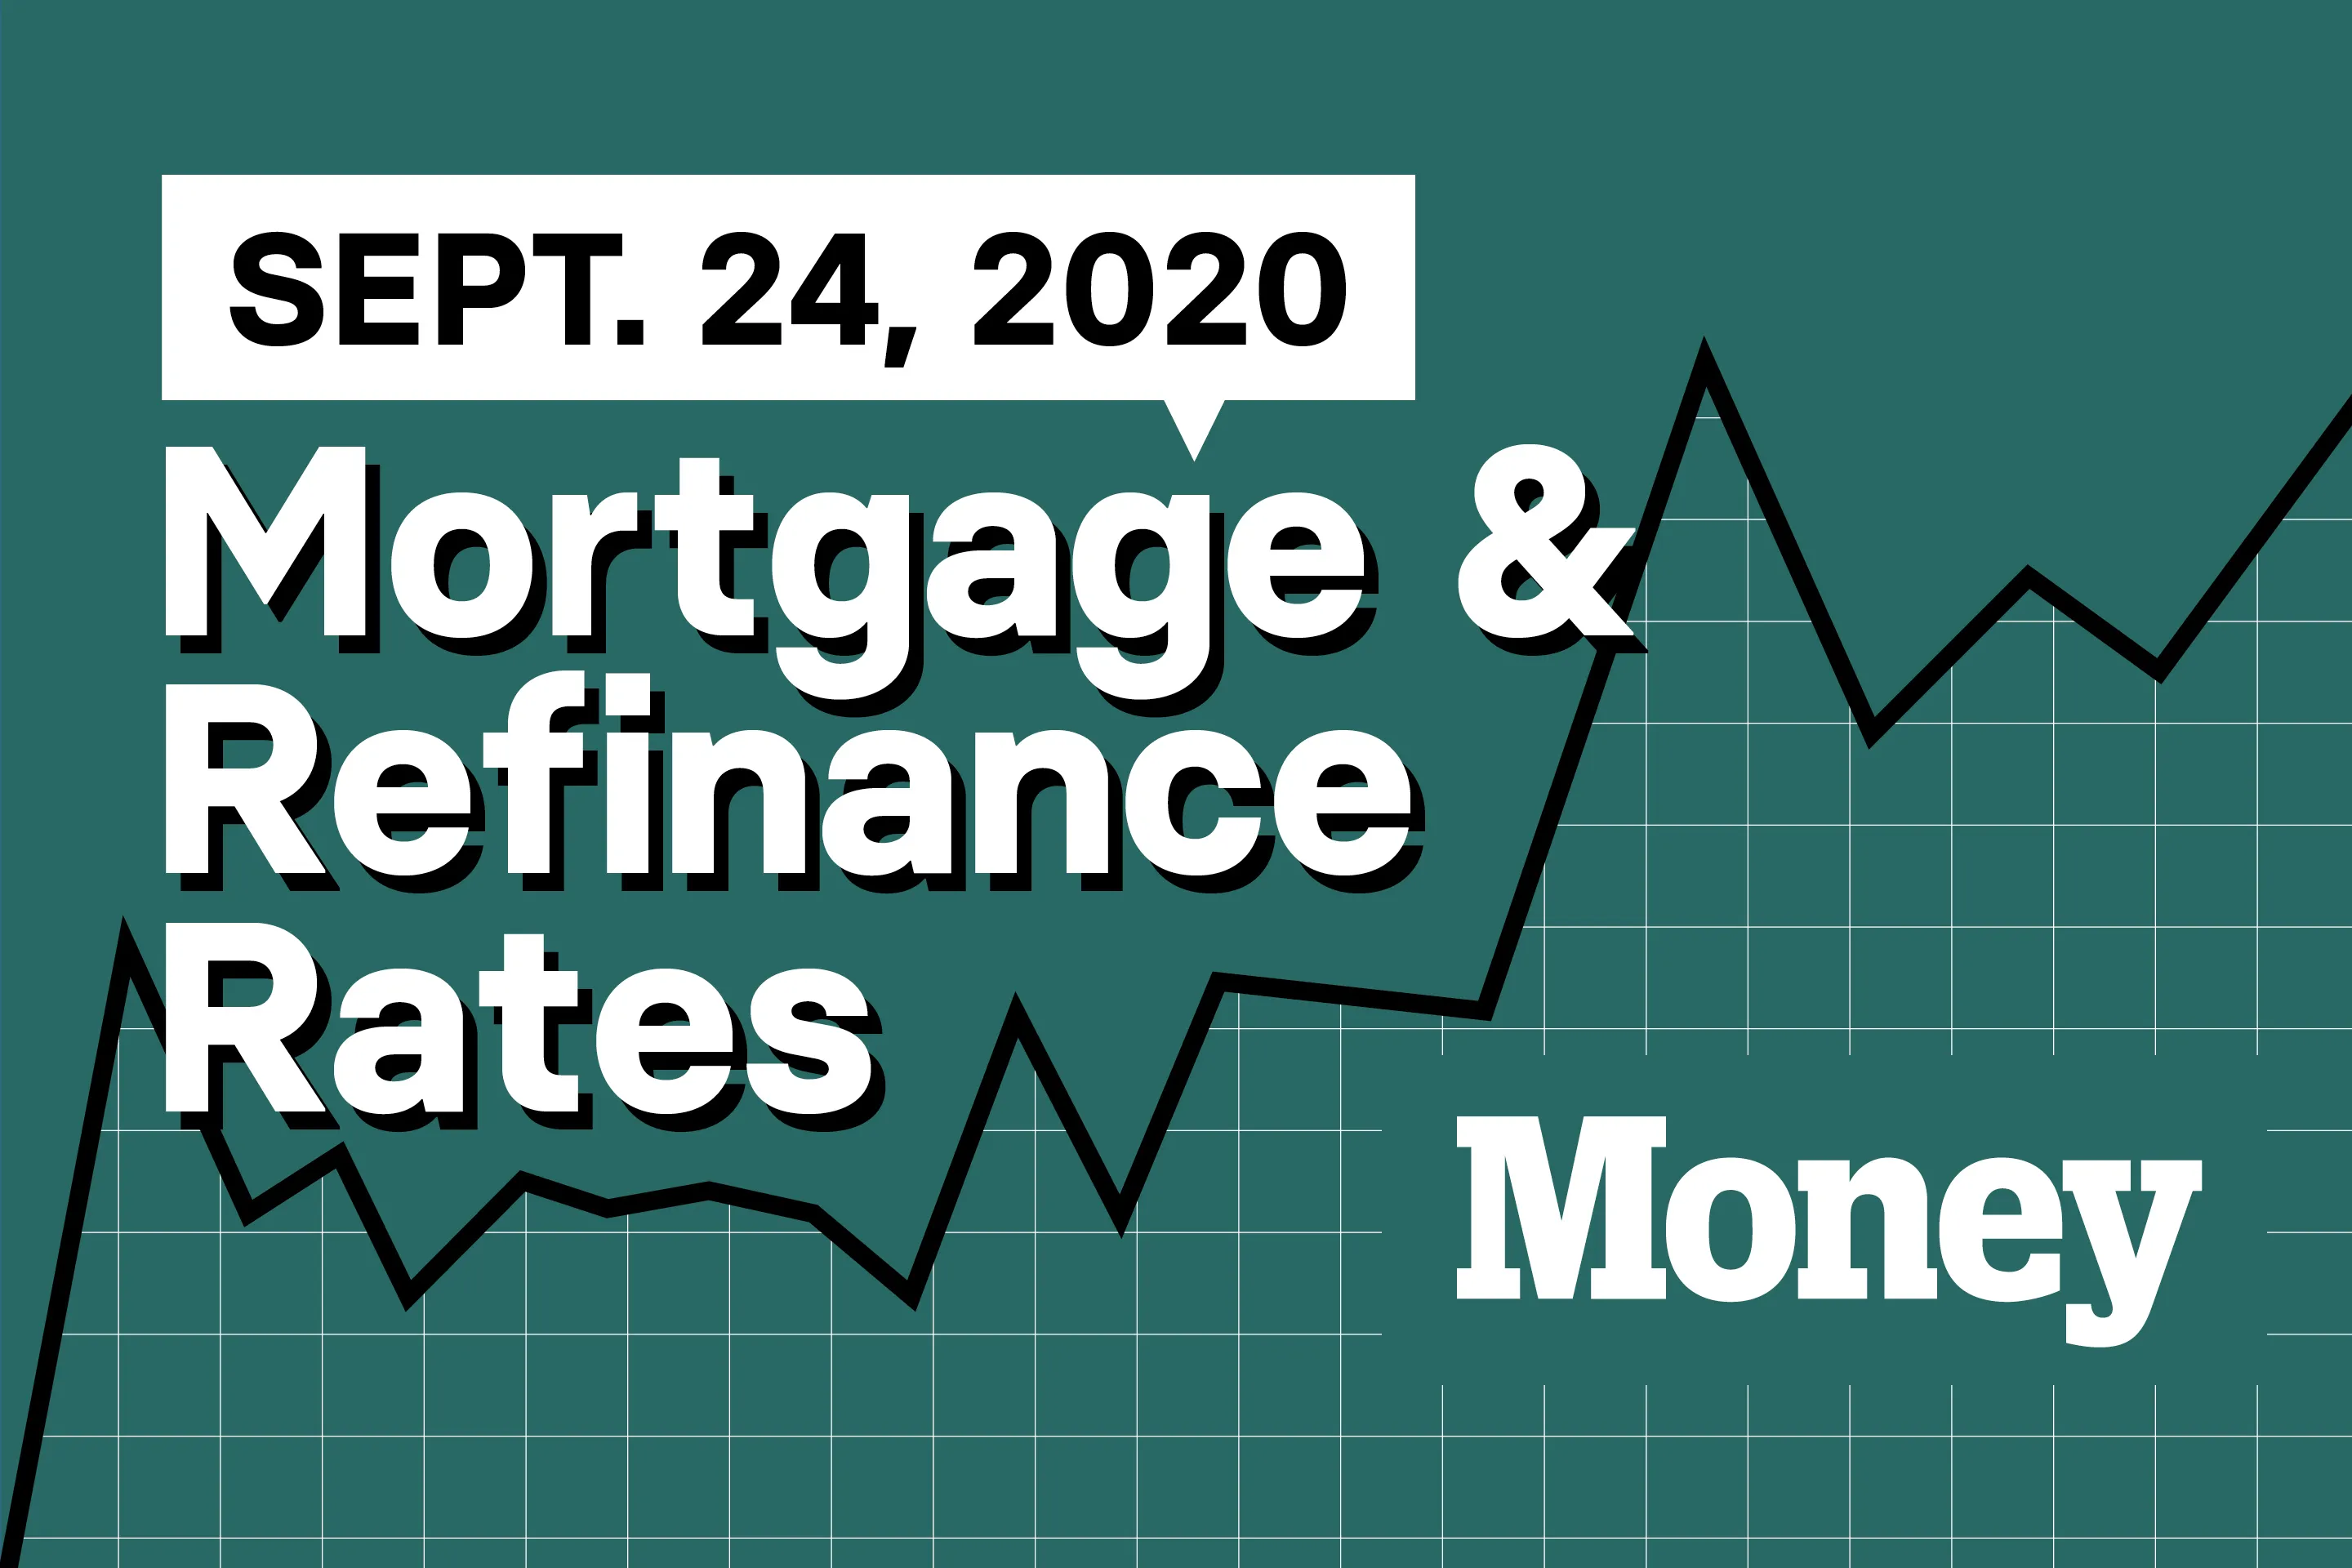 Here Are Today's Best Mortgage & Refinance Rates for September 24, 2020